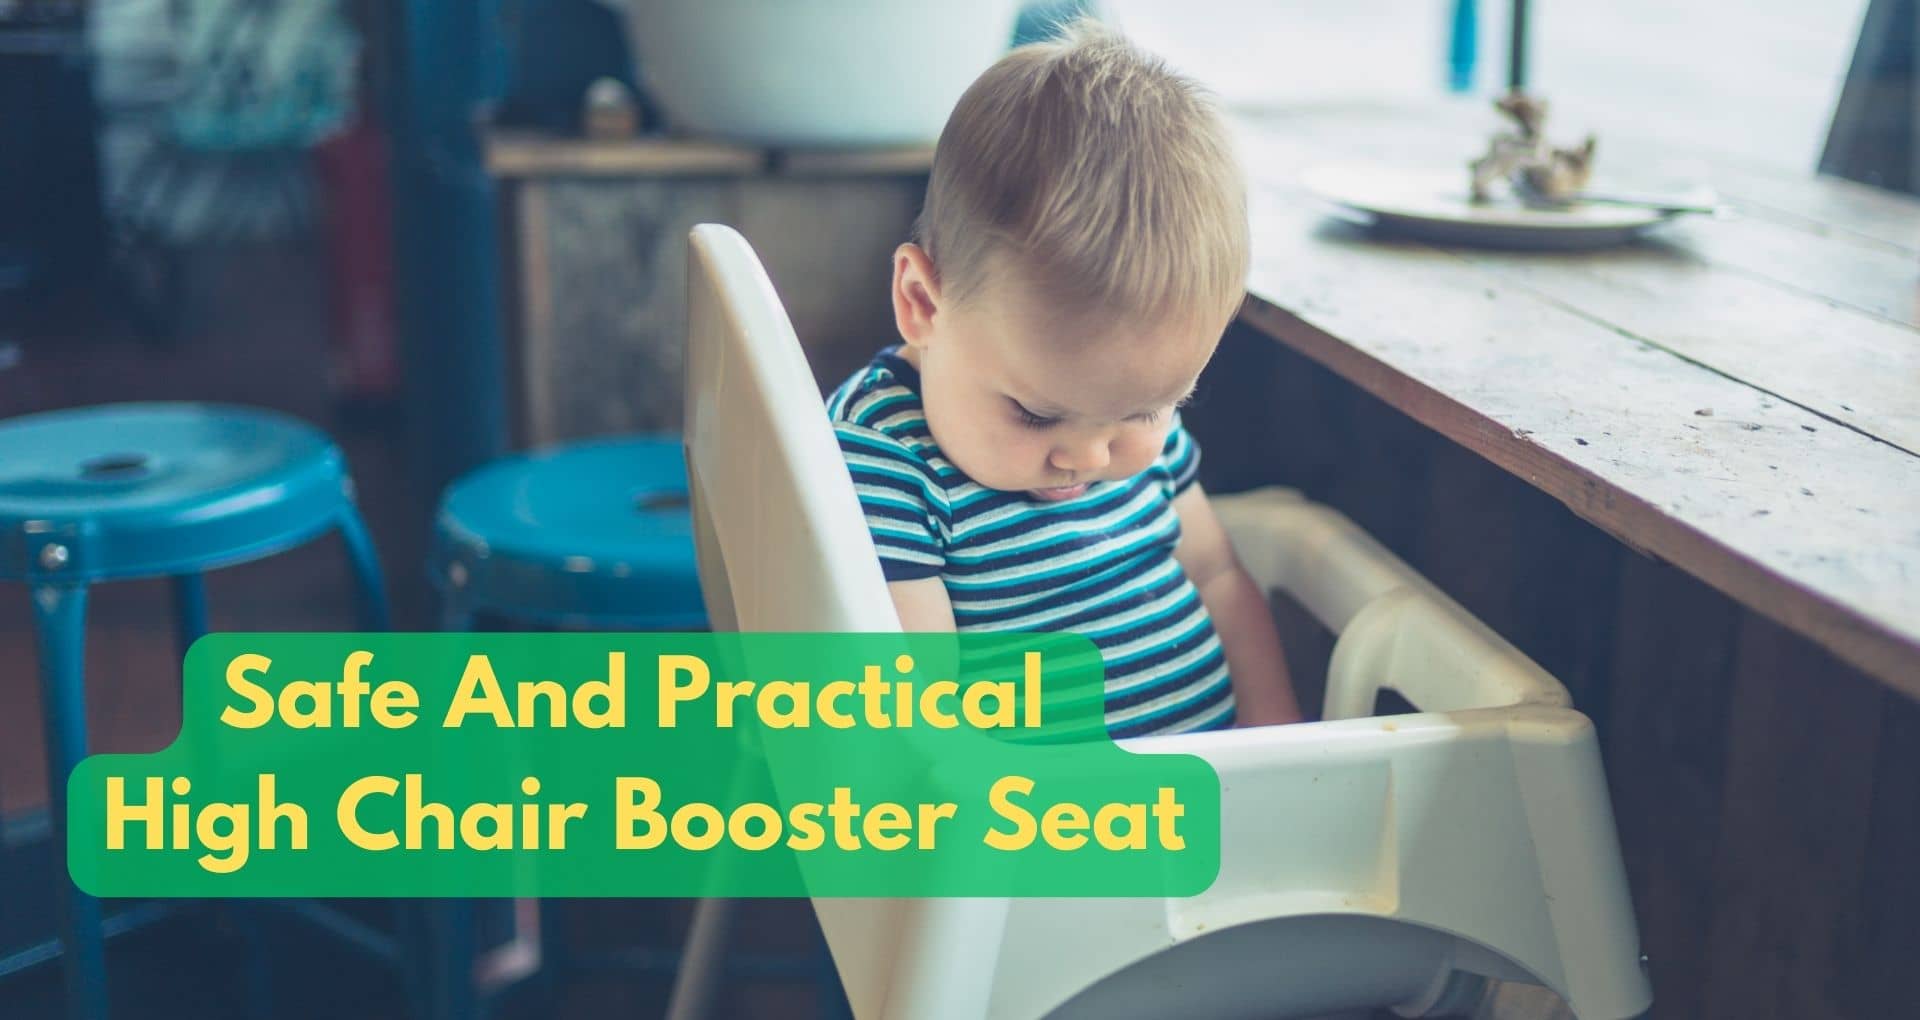 How Do I Select A Safe And Practical High Chair Booster Seat?